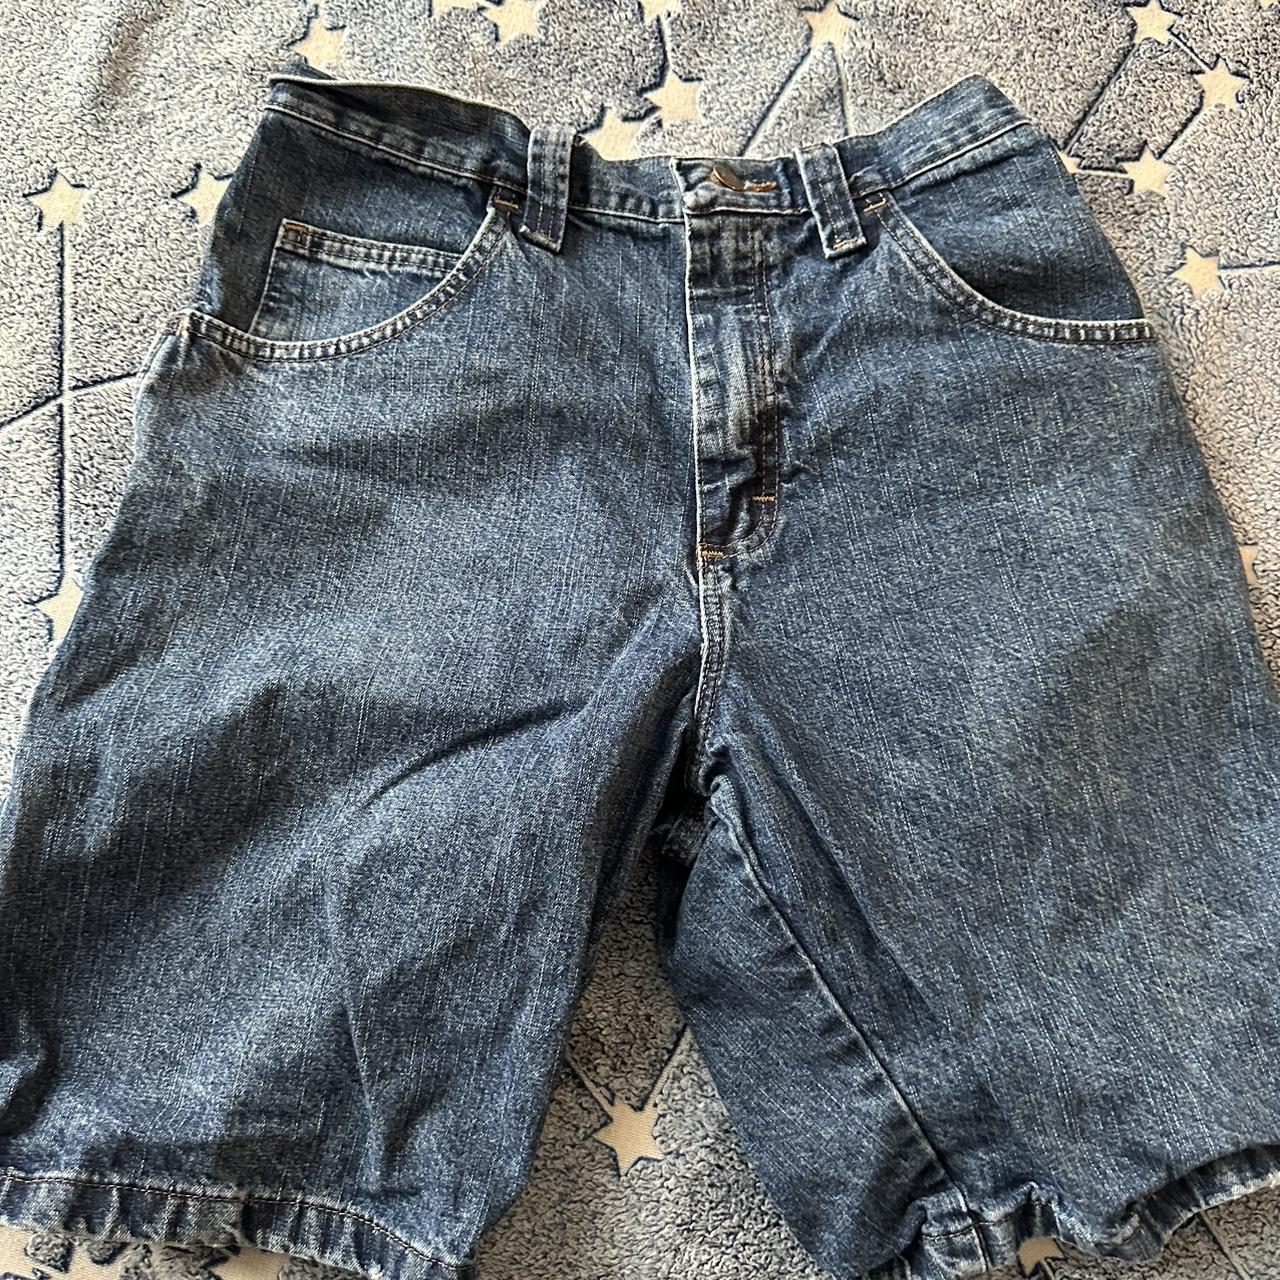 Cargo jorts⭐️ I sewed the waist to fit Would fit a... - Depop